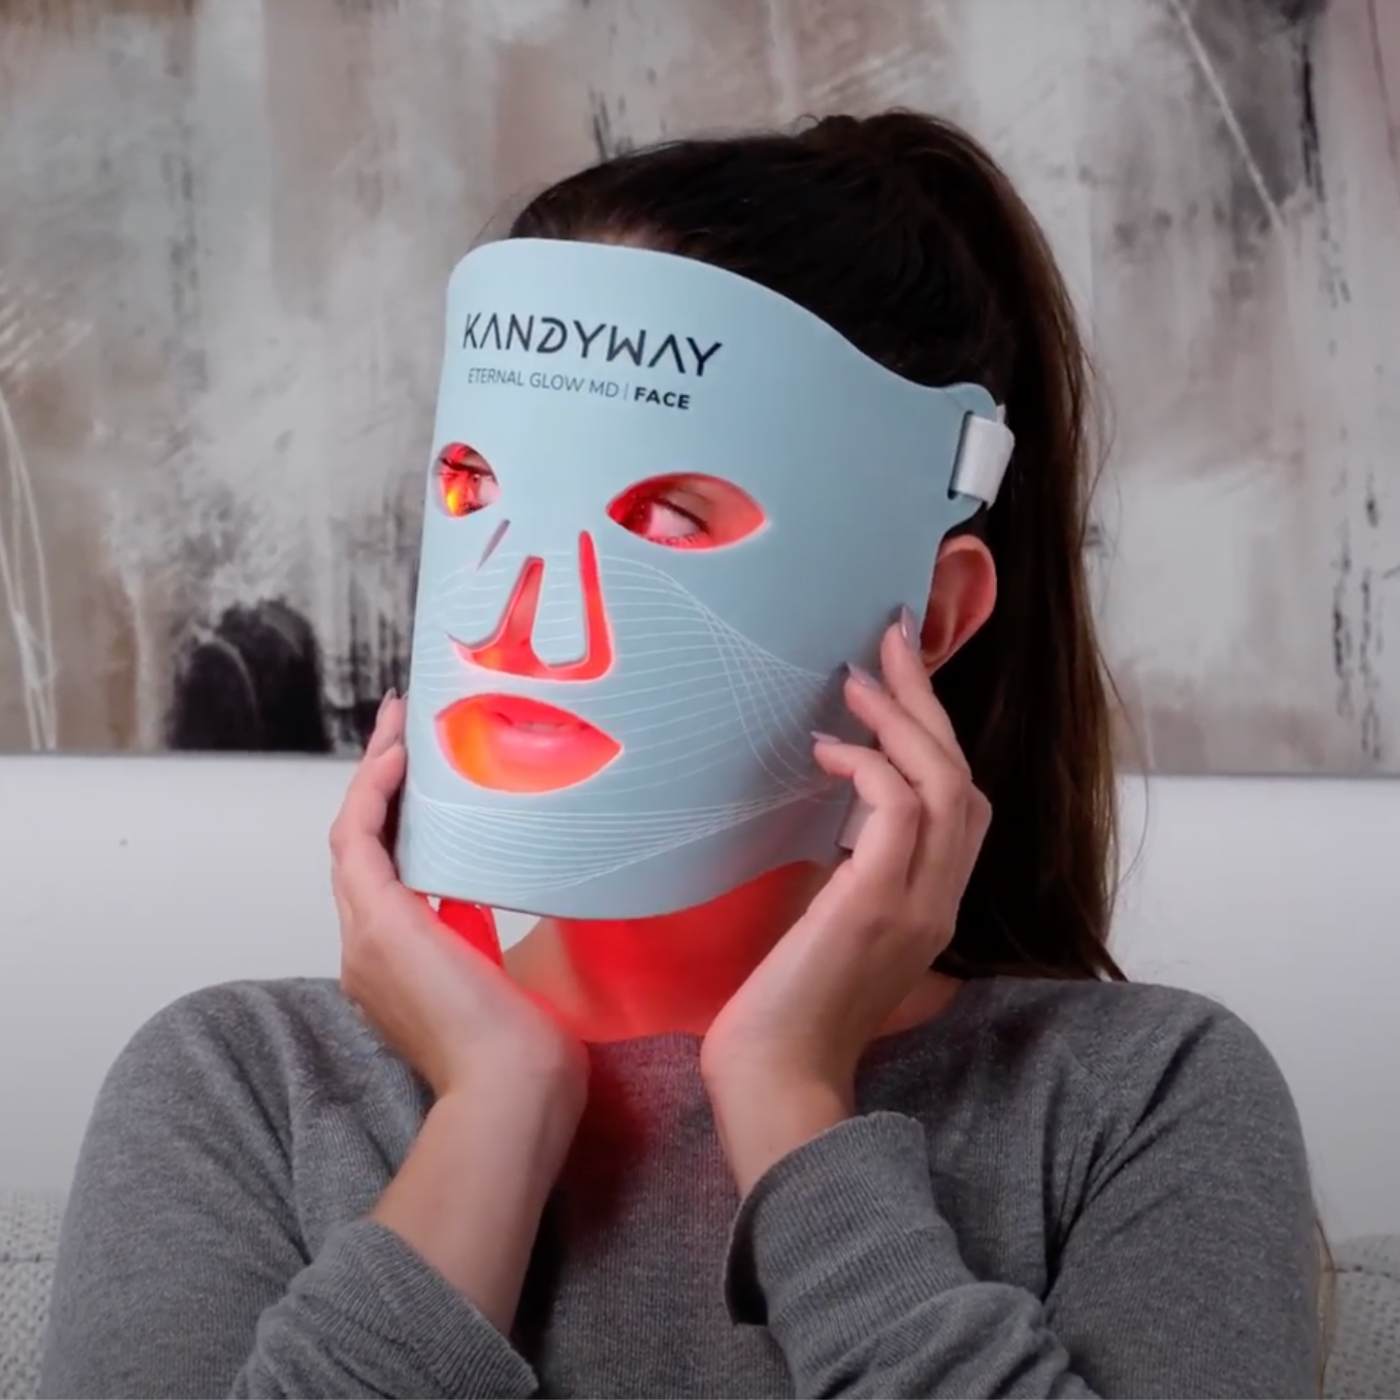 Kandyway Eternal Glow MD - Red Light Therapy Mask